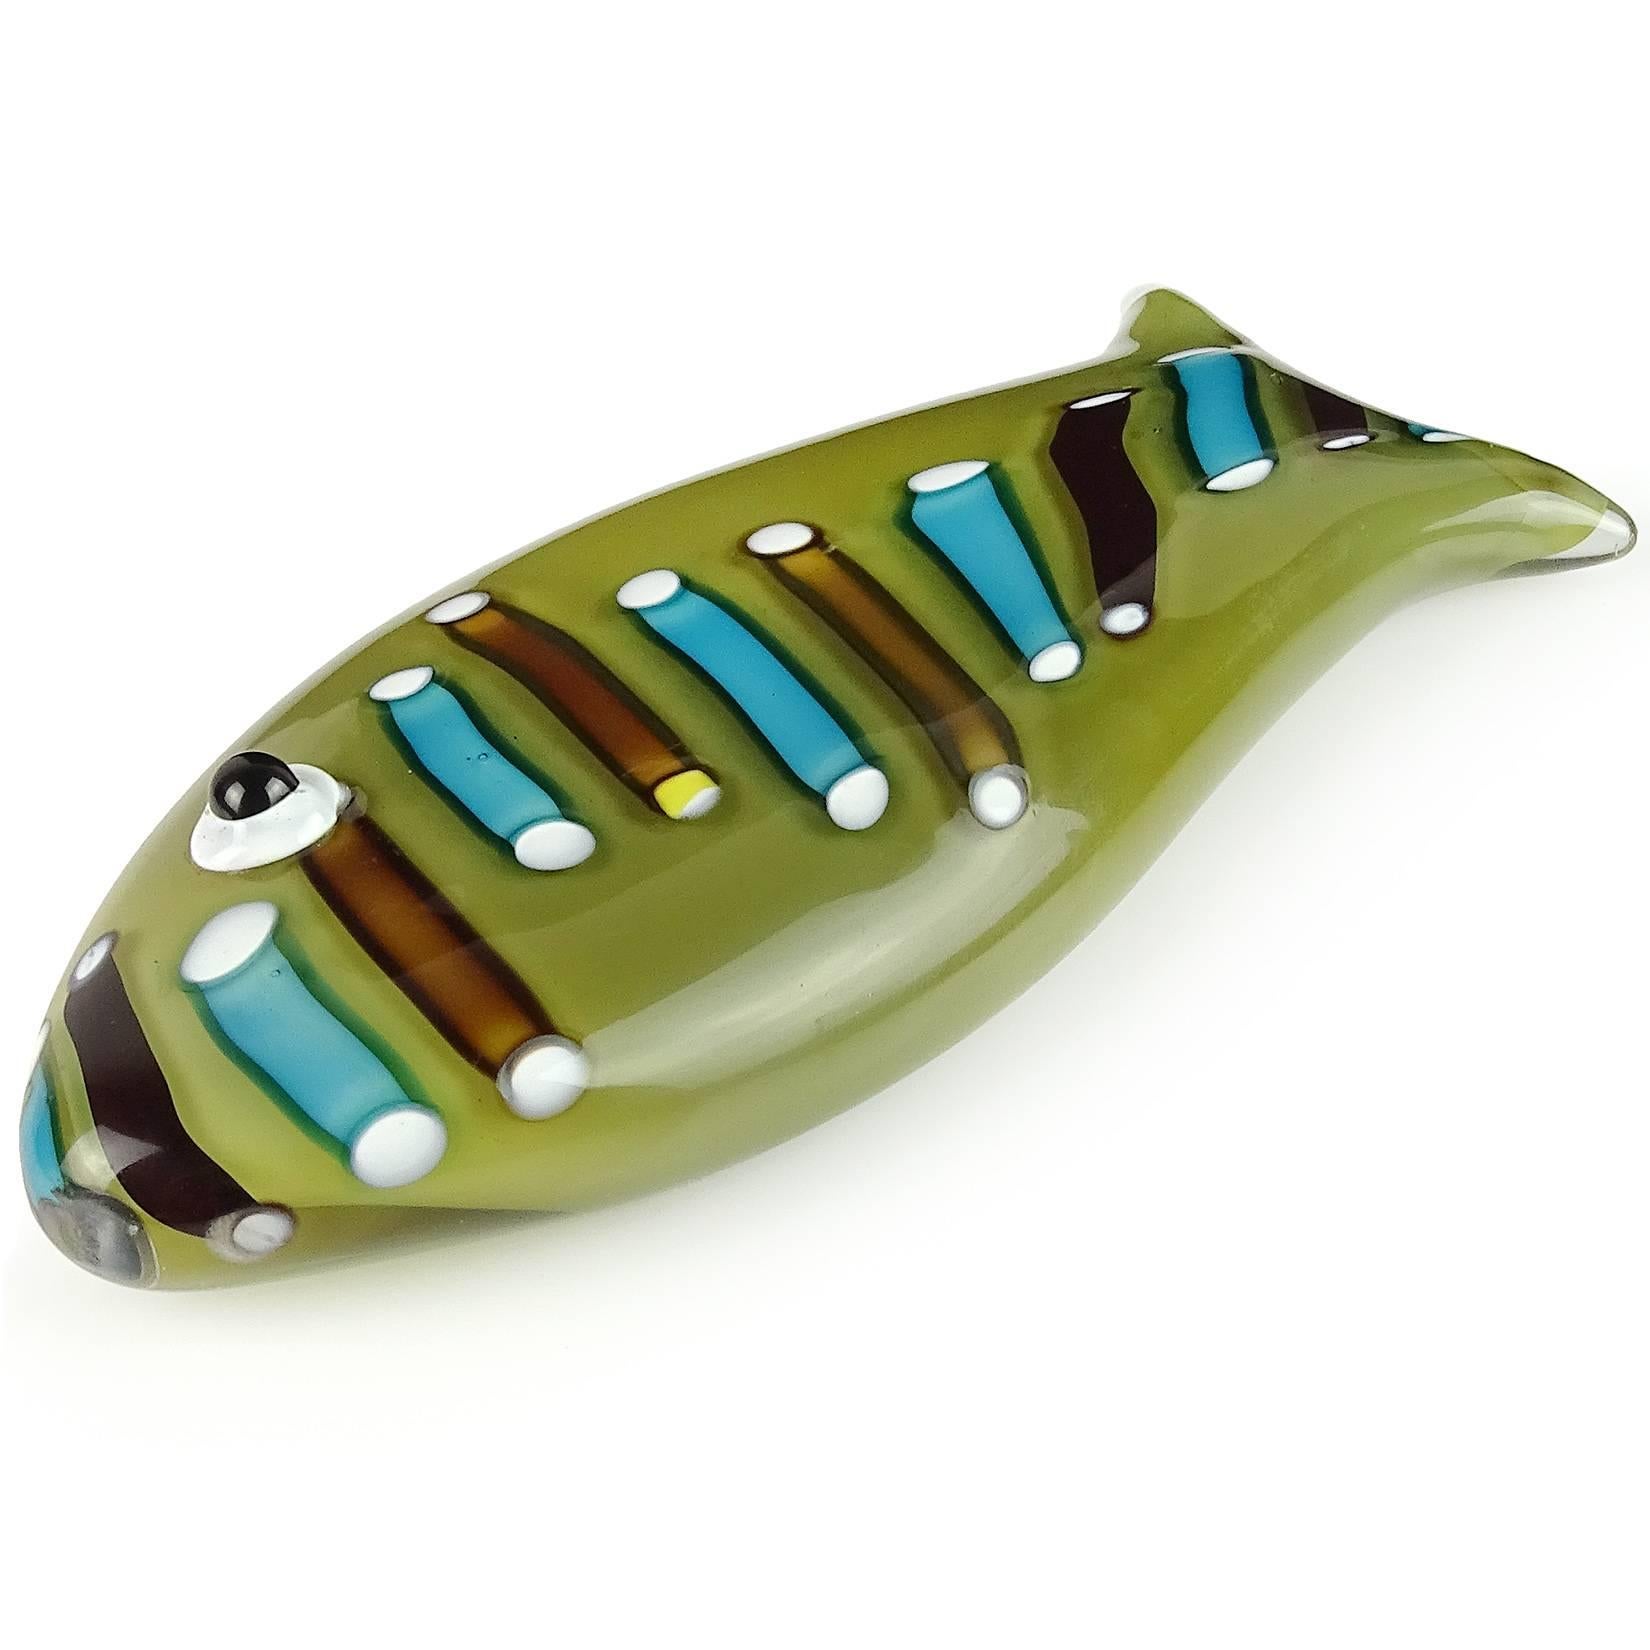 Cute and unusual Murano hand blown olive green with cut murine cane pieces Italian art glass fish sculpture / paperweight. Attributed to designer Ken Scott for Venini, circa 1950s. The fish looks to be unsigned. Measures 6 3/4” long. Last photo